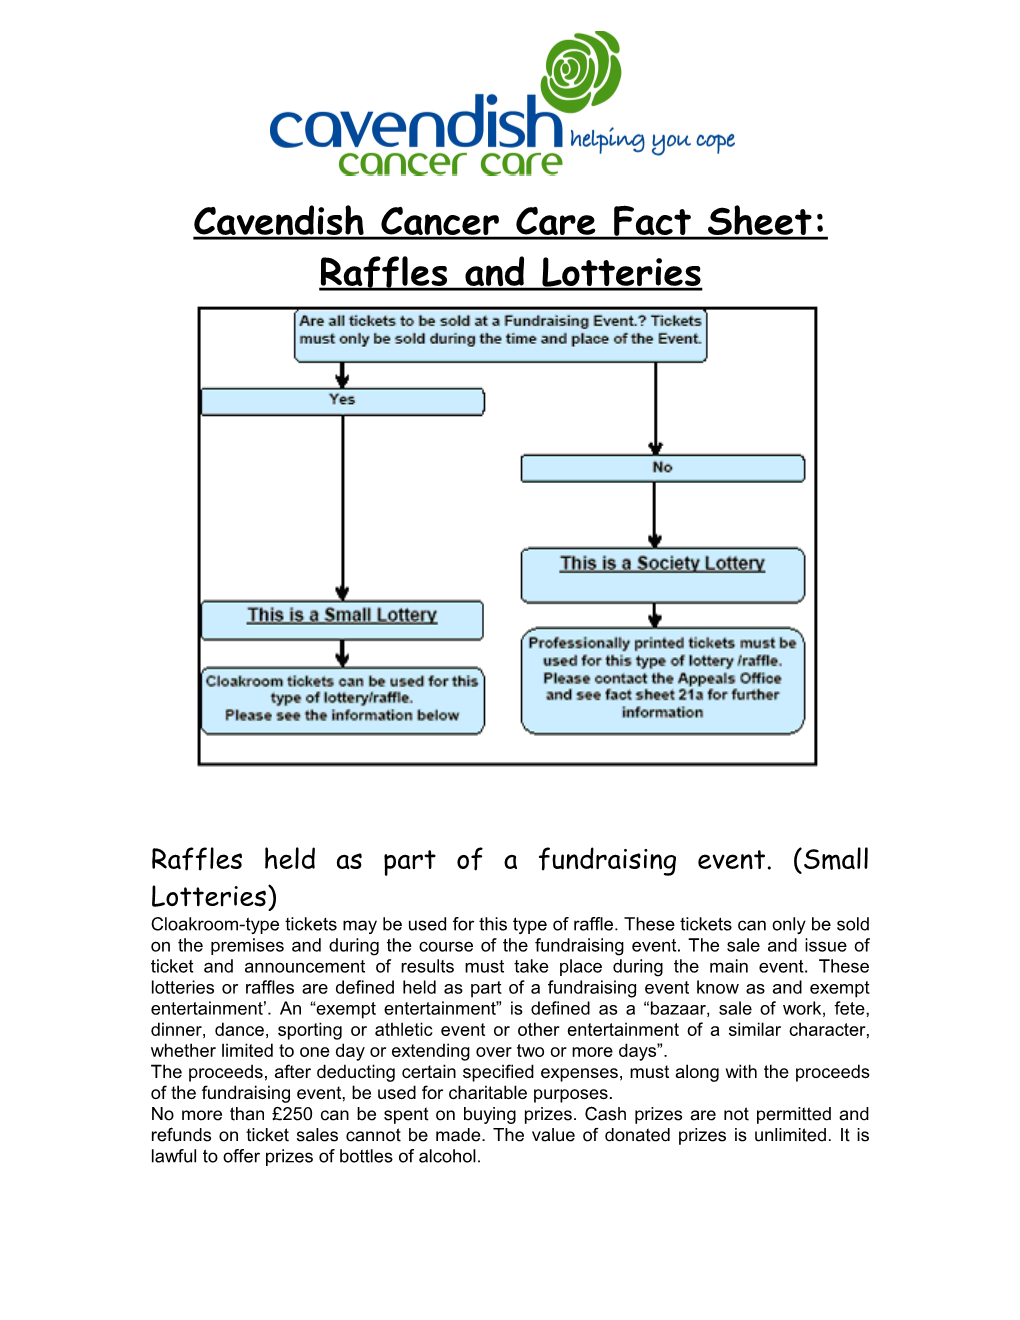 Cavendish Cancer Care Fact Sheet Raffles and Lotteries